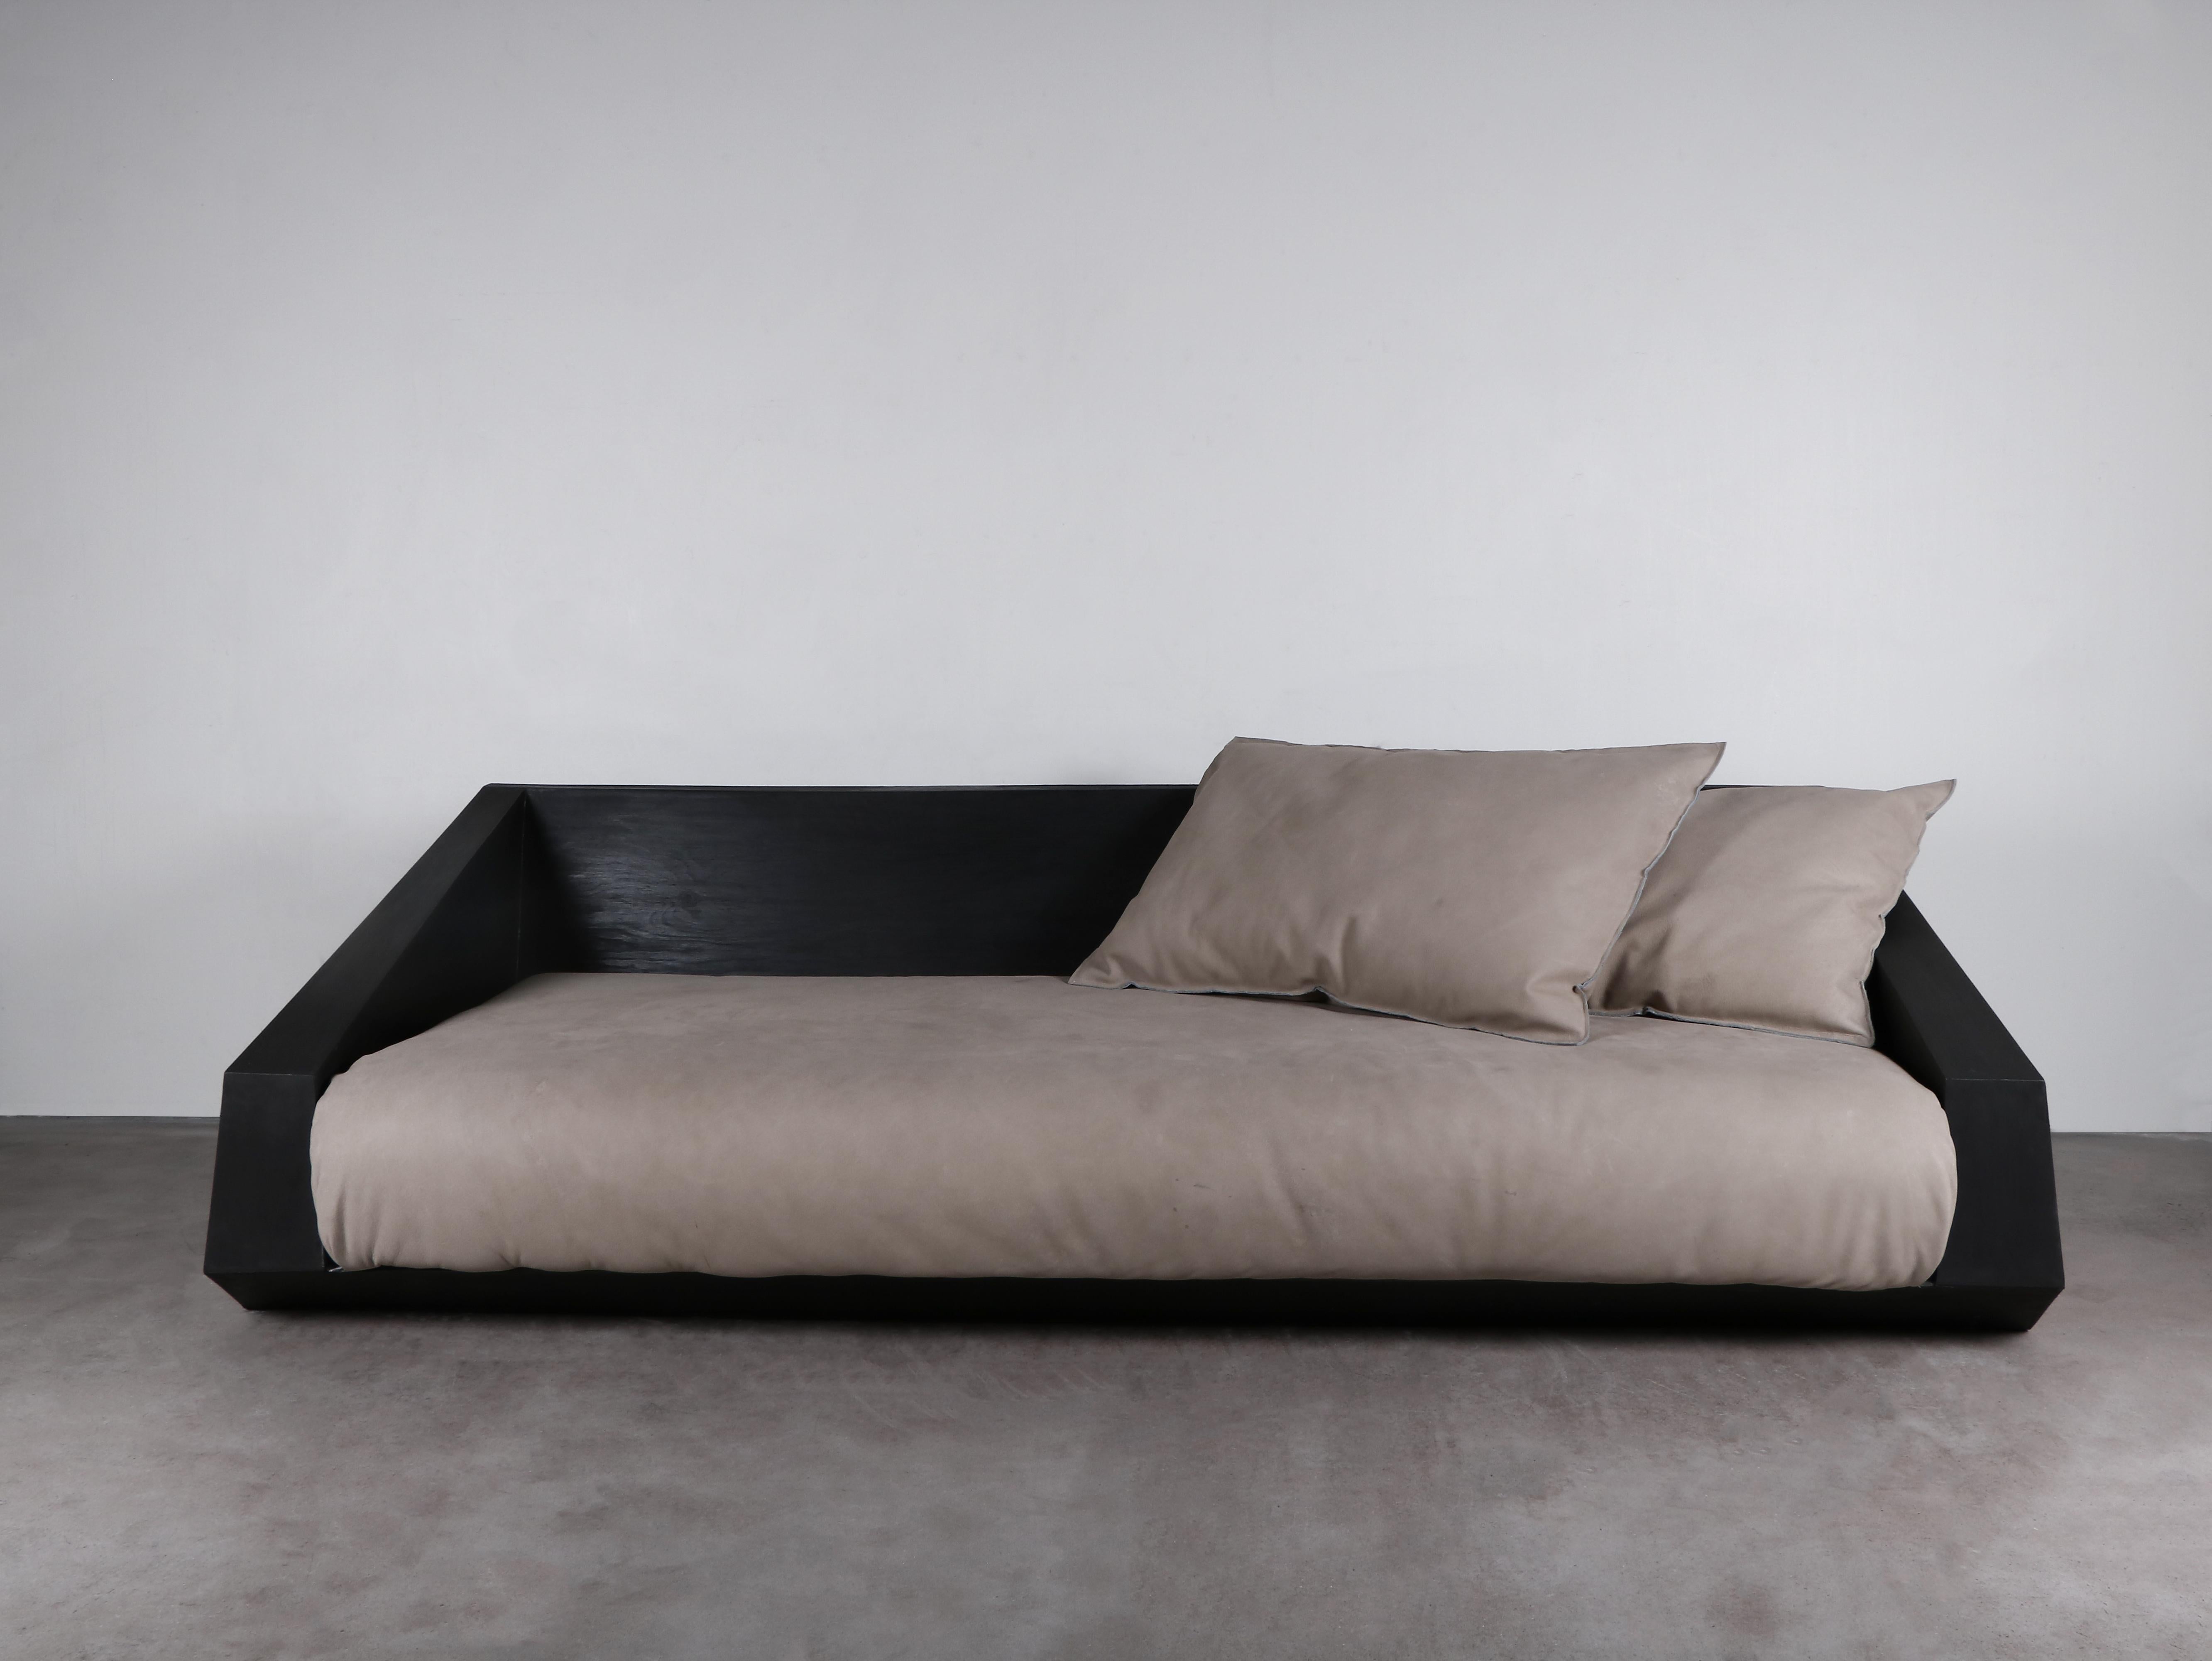 Djup sofa by Lucas Morten
Limited Edition of 15
Dimensions: L 240 x W 103 x H 65 cm
Material: Hand waxed plywood, leather

Lucas Morten
Between the interface of functional objects and visual art, Lucas Morten invites you to an era where